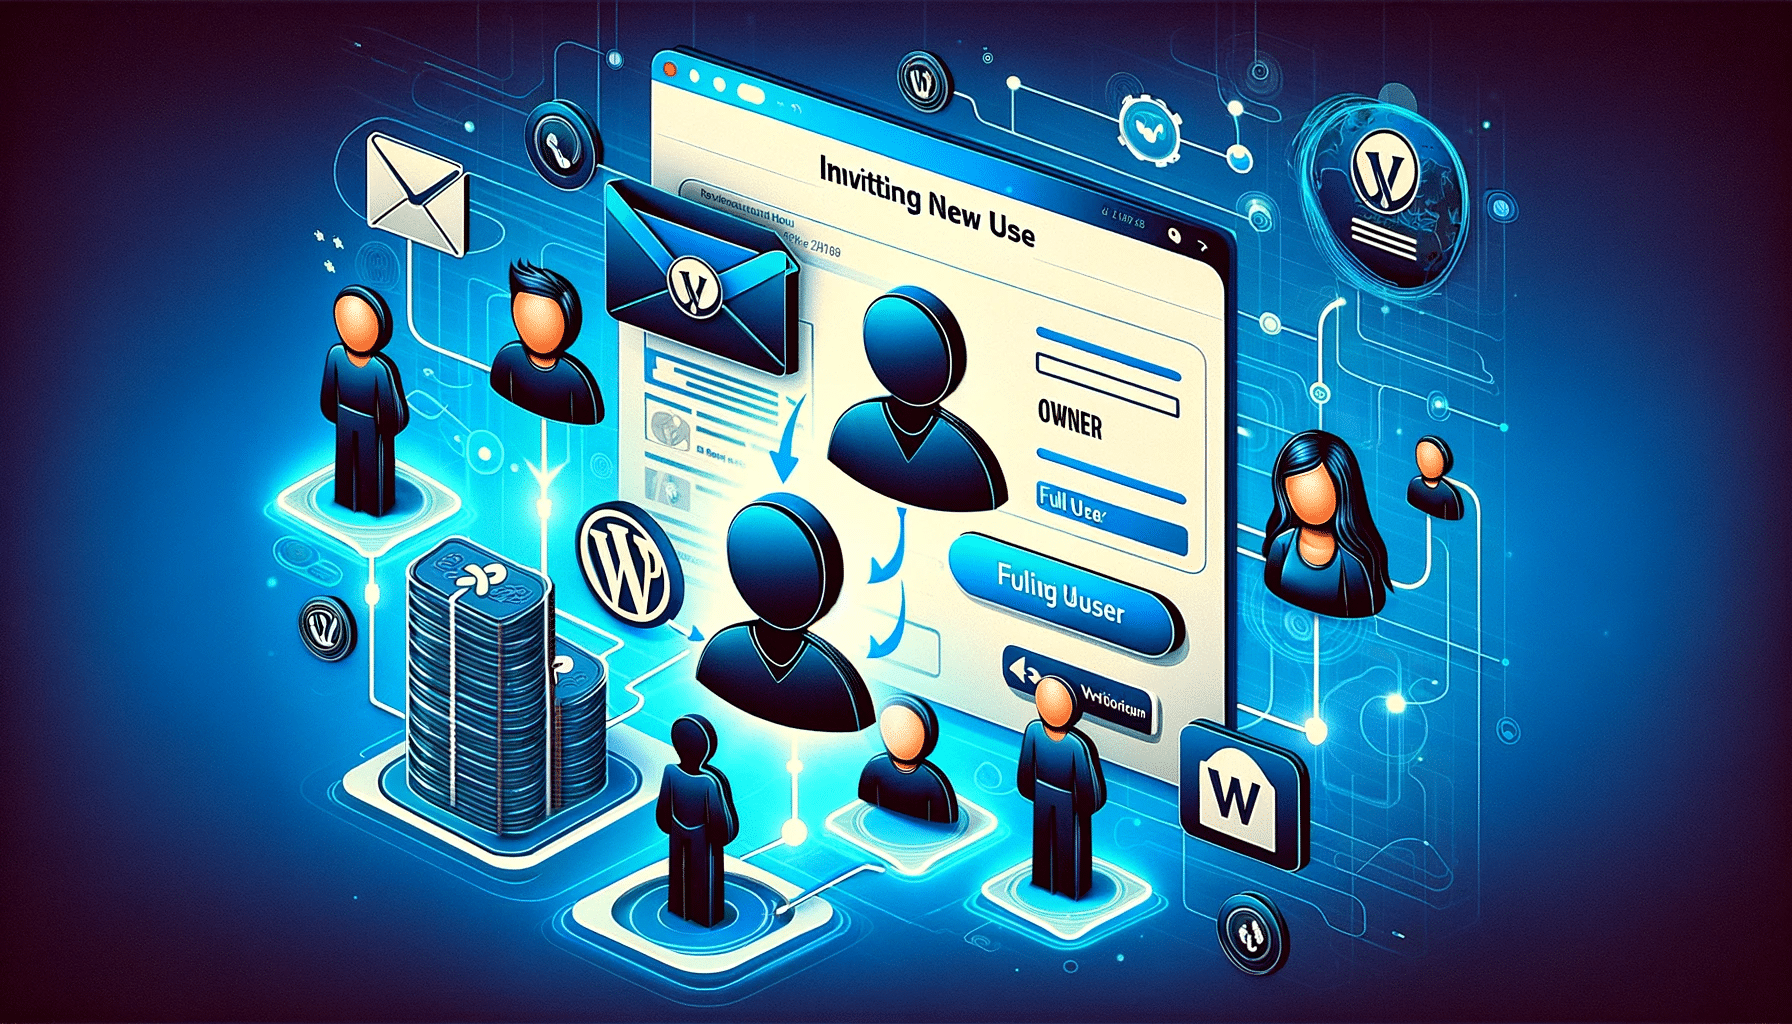 This is a digital illustration portraying a WordPress user management or blogging concept with stylized humanoid figures interacting with interface elements and icons.